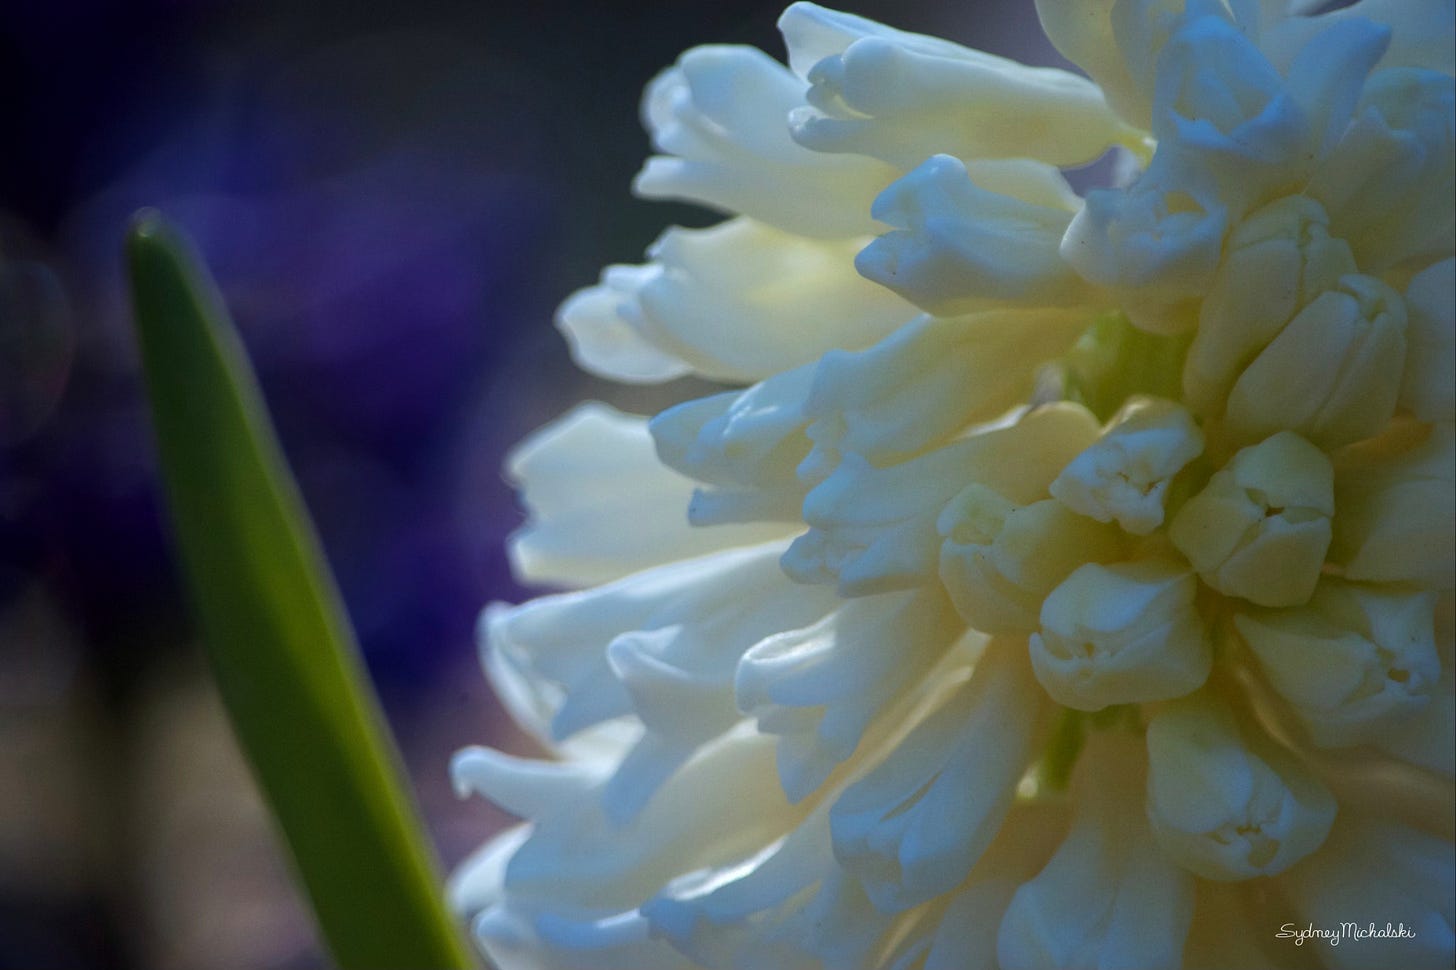 A white hyacinth in full bloom glows with purple hyacinths in the background.